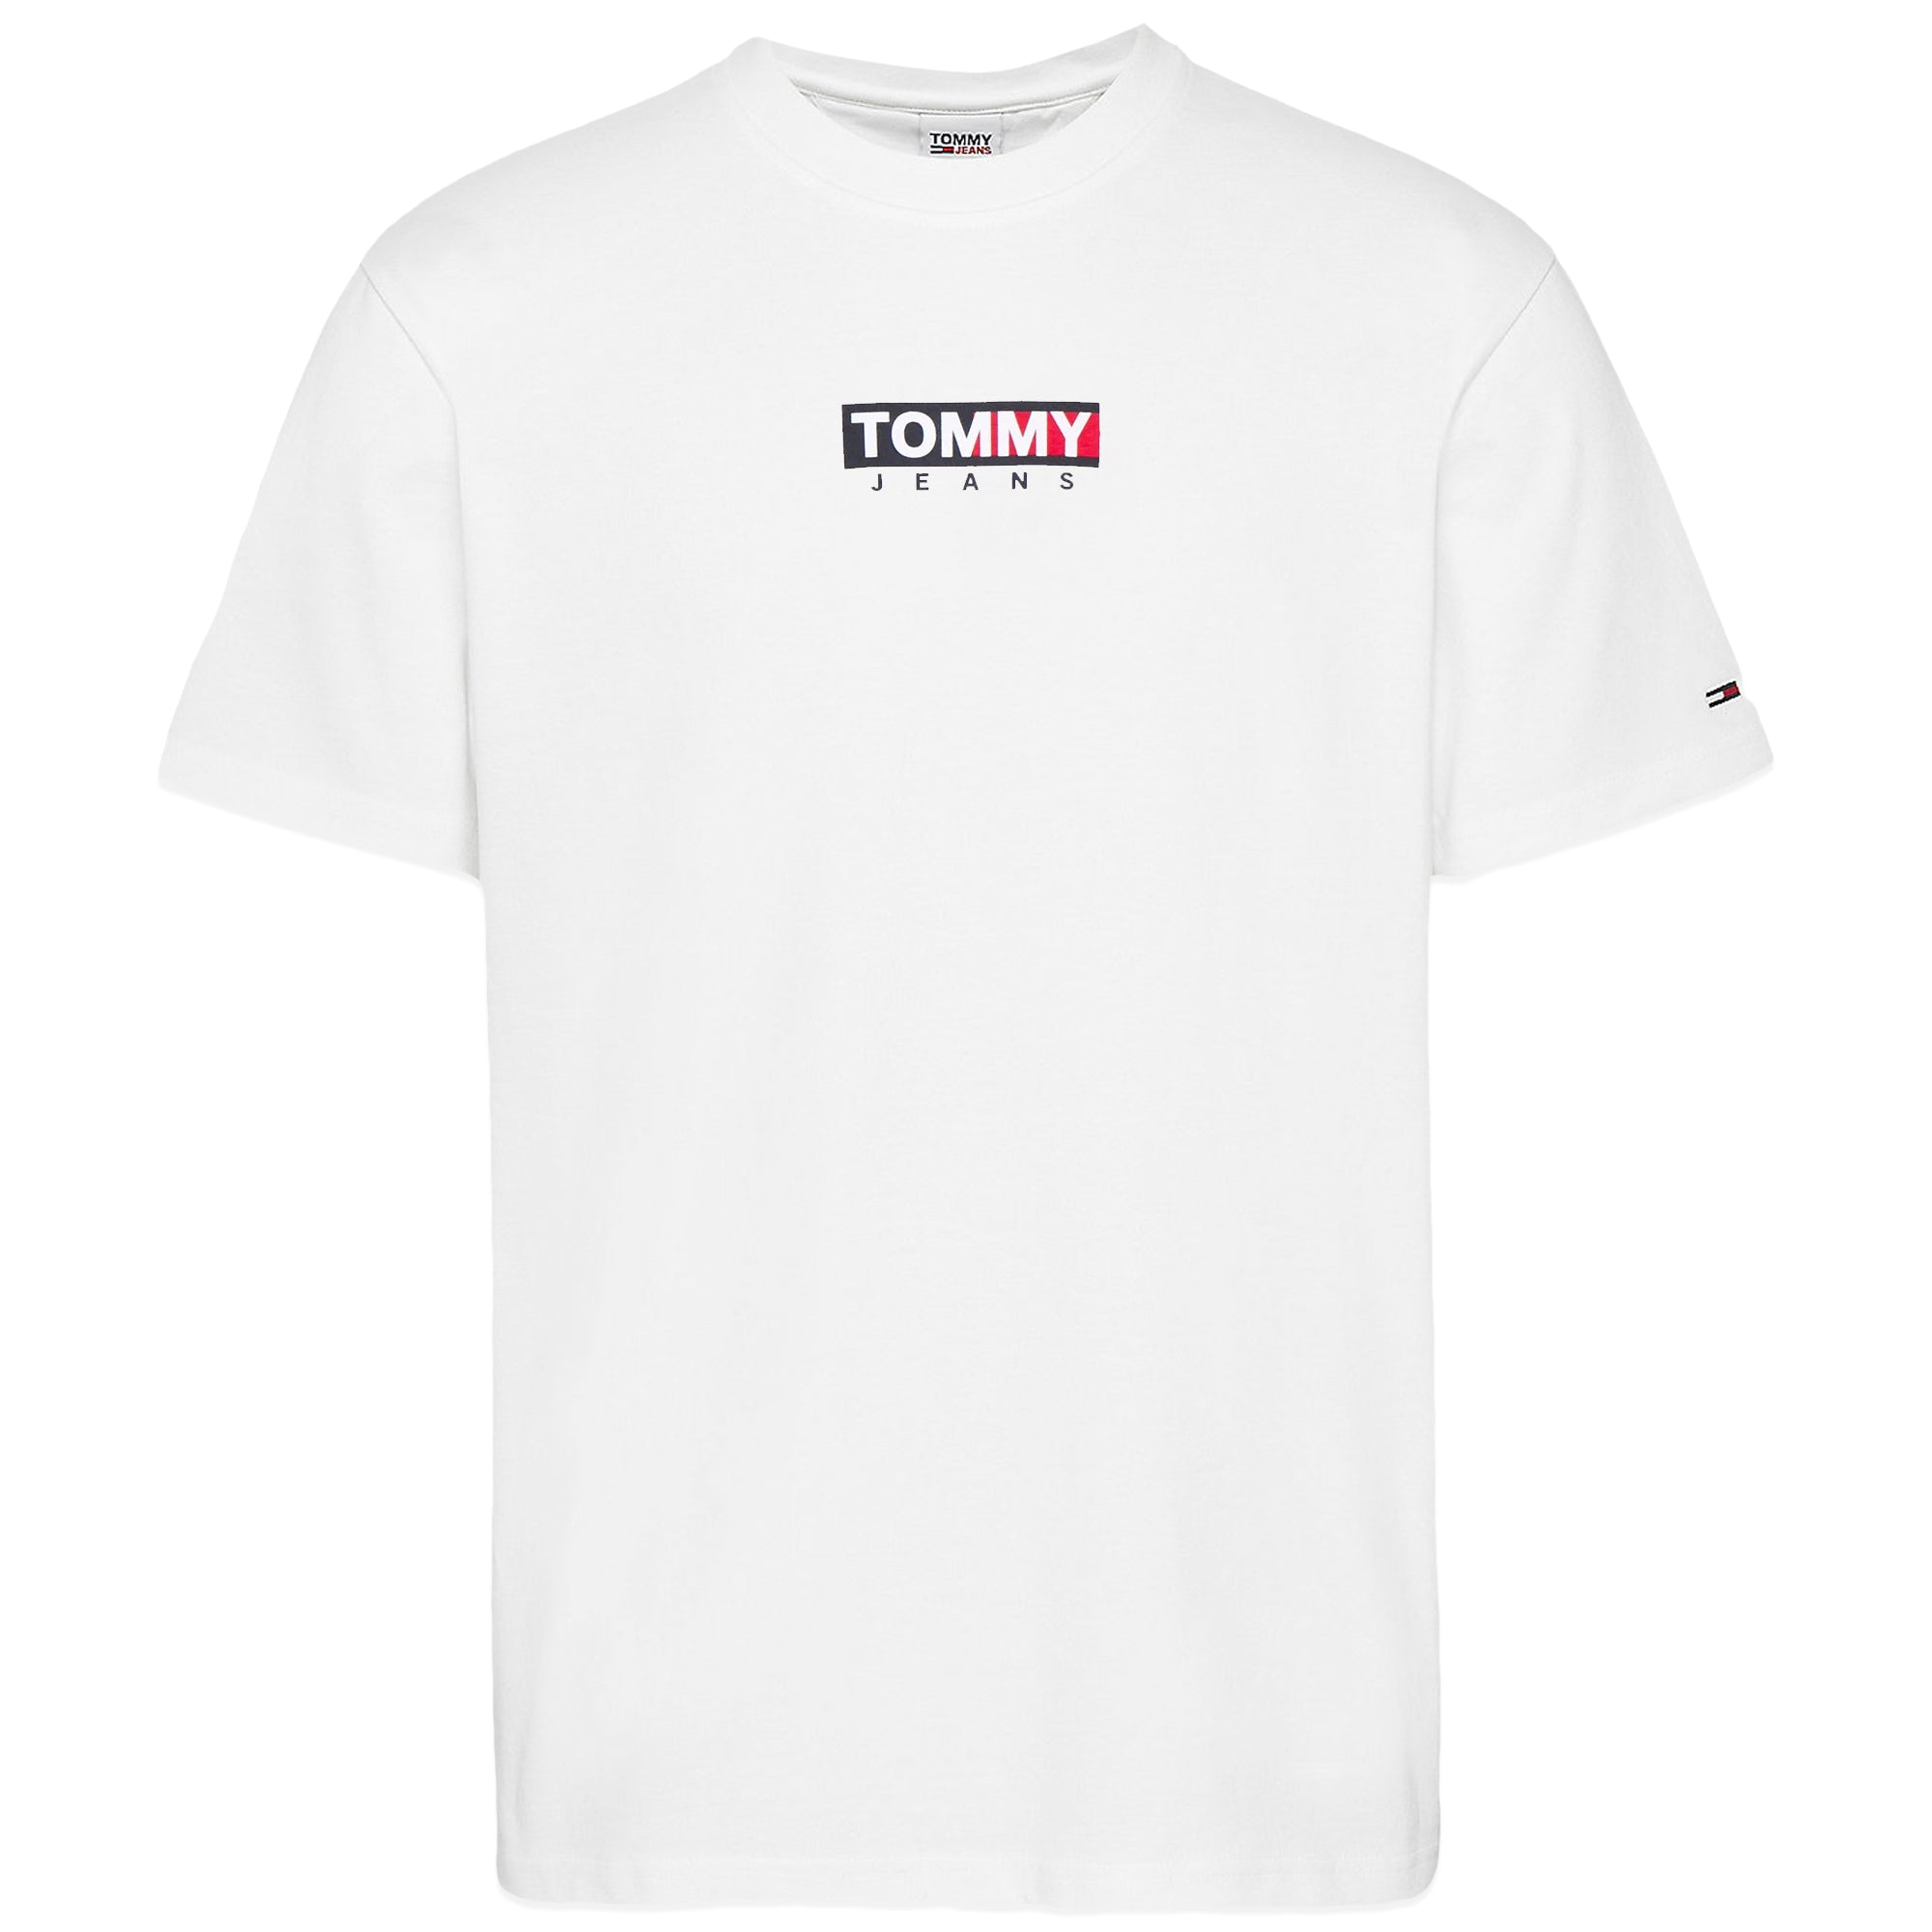 Tommy Jeans Entry Print T-Shirt - White